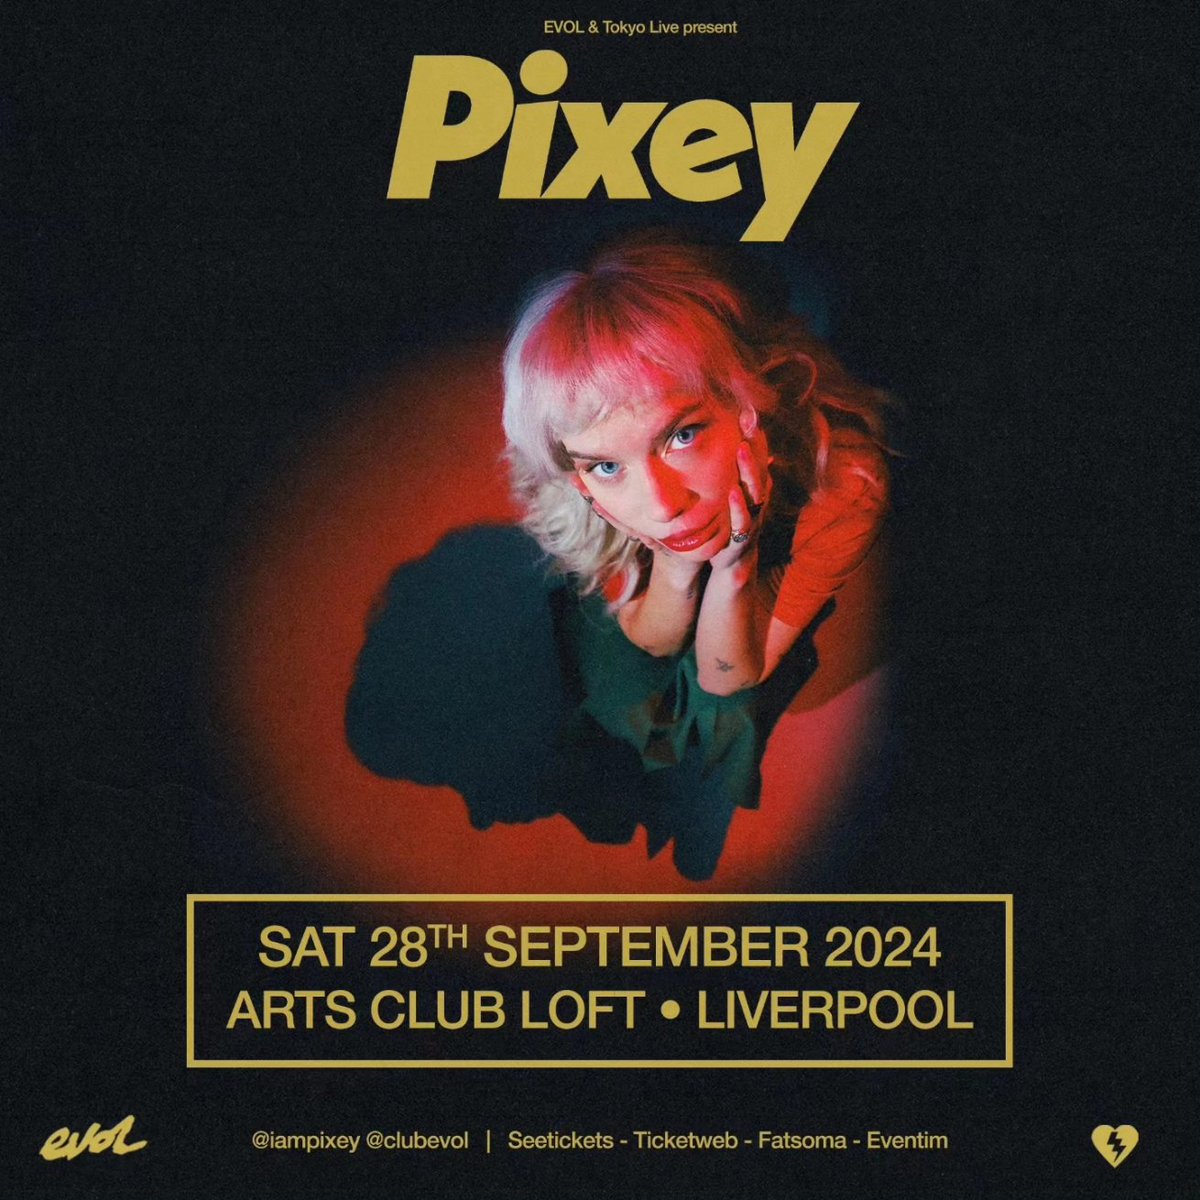 𝐄𝐕𝐎𝐋 𝐓𝐑𝐀𝐂𝐊 𝐎𝐅 𝐓𝐇𝐄 𝐖𝐄𝐄𝐊 @pixeyofficial '𝘔𝘪𝘭𝘭𝘪𝘰𝘯 𝘋𝘰𝘭𝘭𝘢𝘳 𝘉𝘢𝘣𝘺' The debut album of the same name drops Aug 2nd @ChessClubRecord whilst the tour home show is Saturday September 28th at @artsclublpool. Tickets available HERE: seetickets.com/event/pixey/ar…